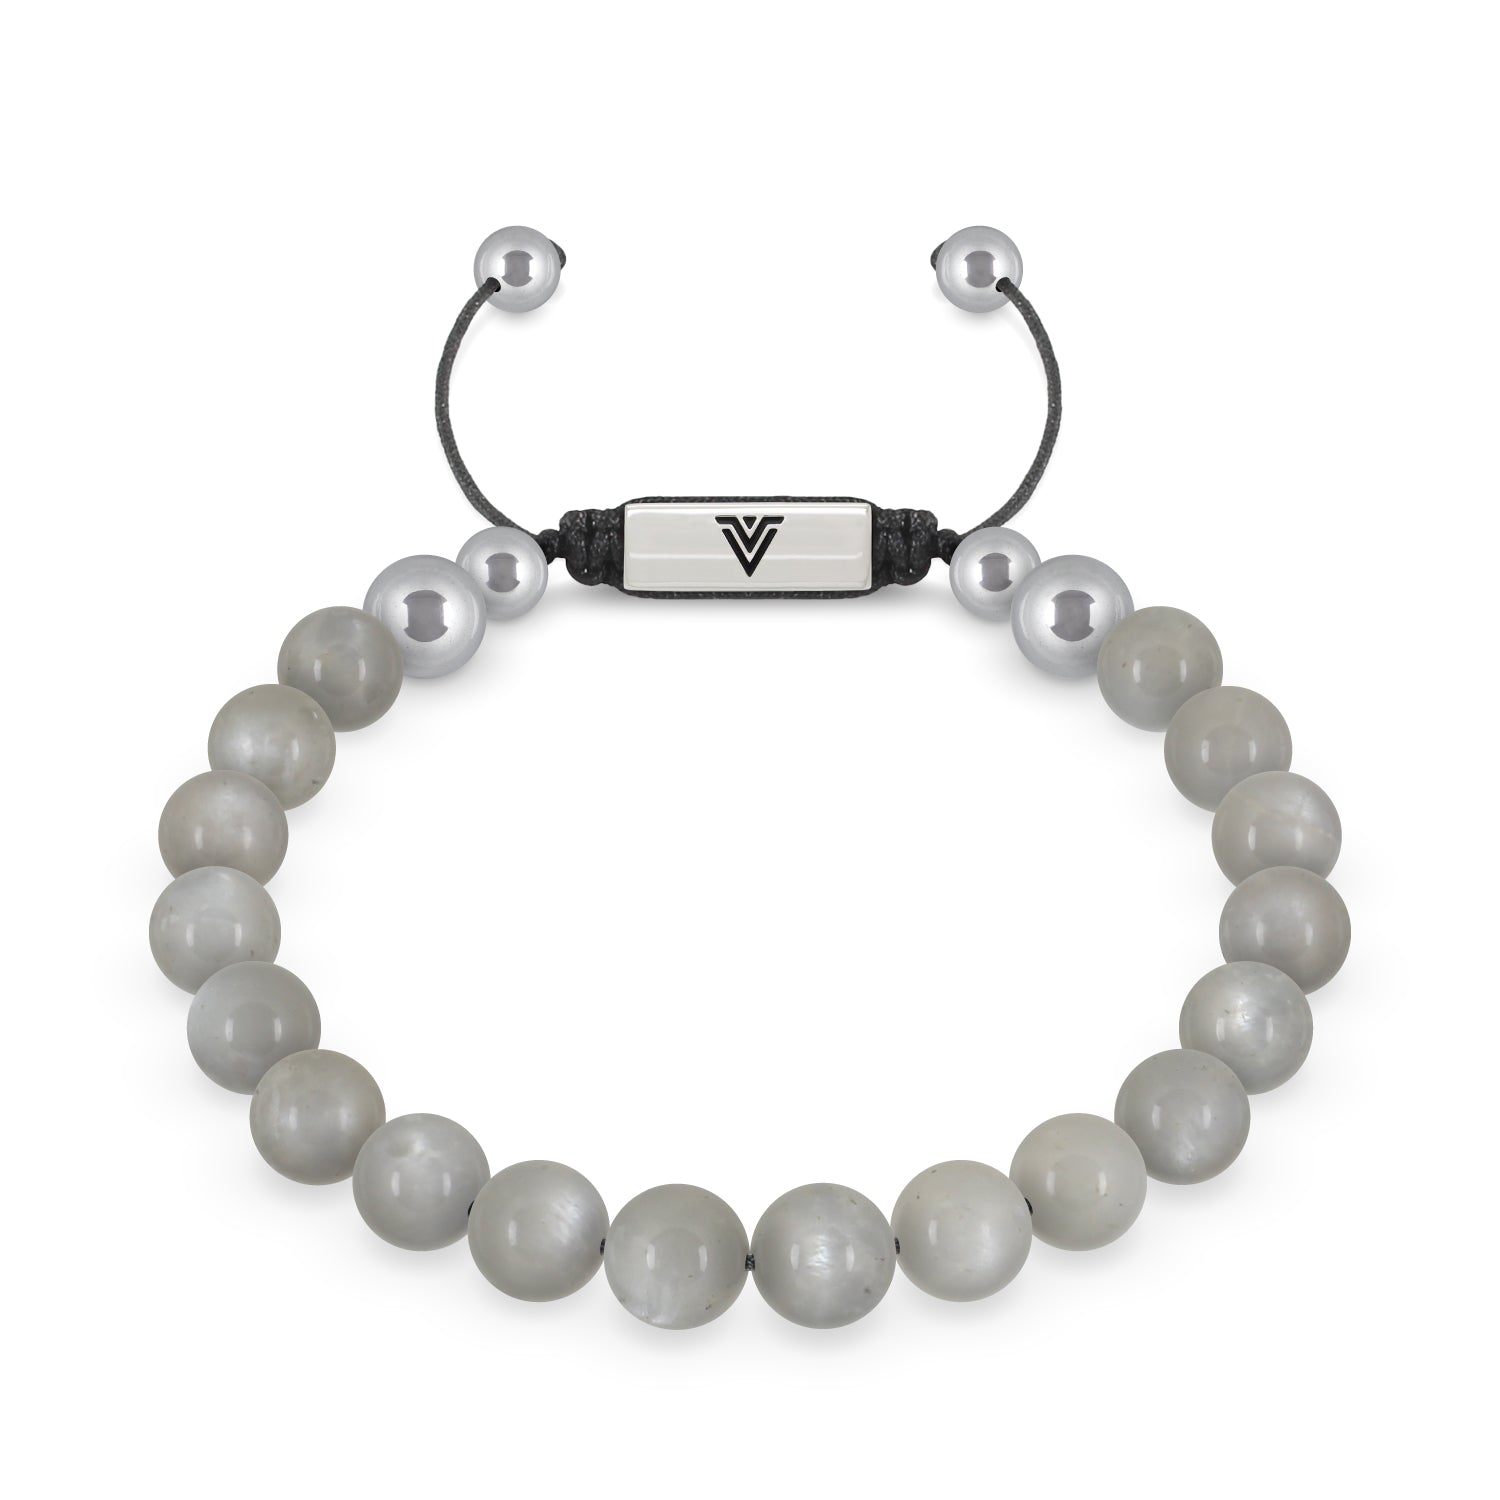 Front view of an 8mm Moonstone beaded shamballa bracelet with silver stainless steel logo bead made by Voltlin